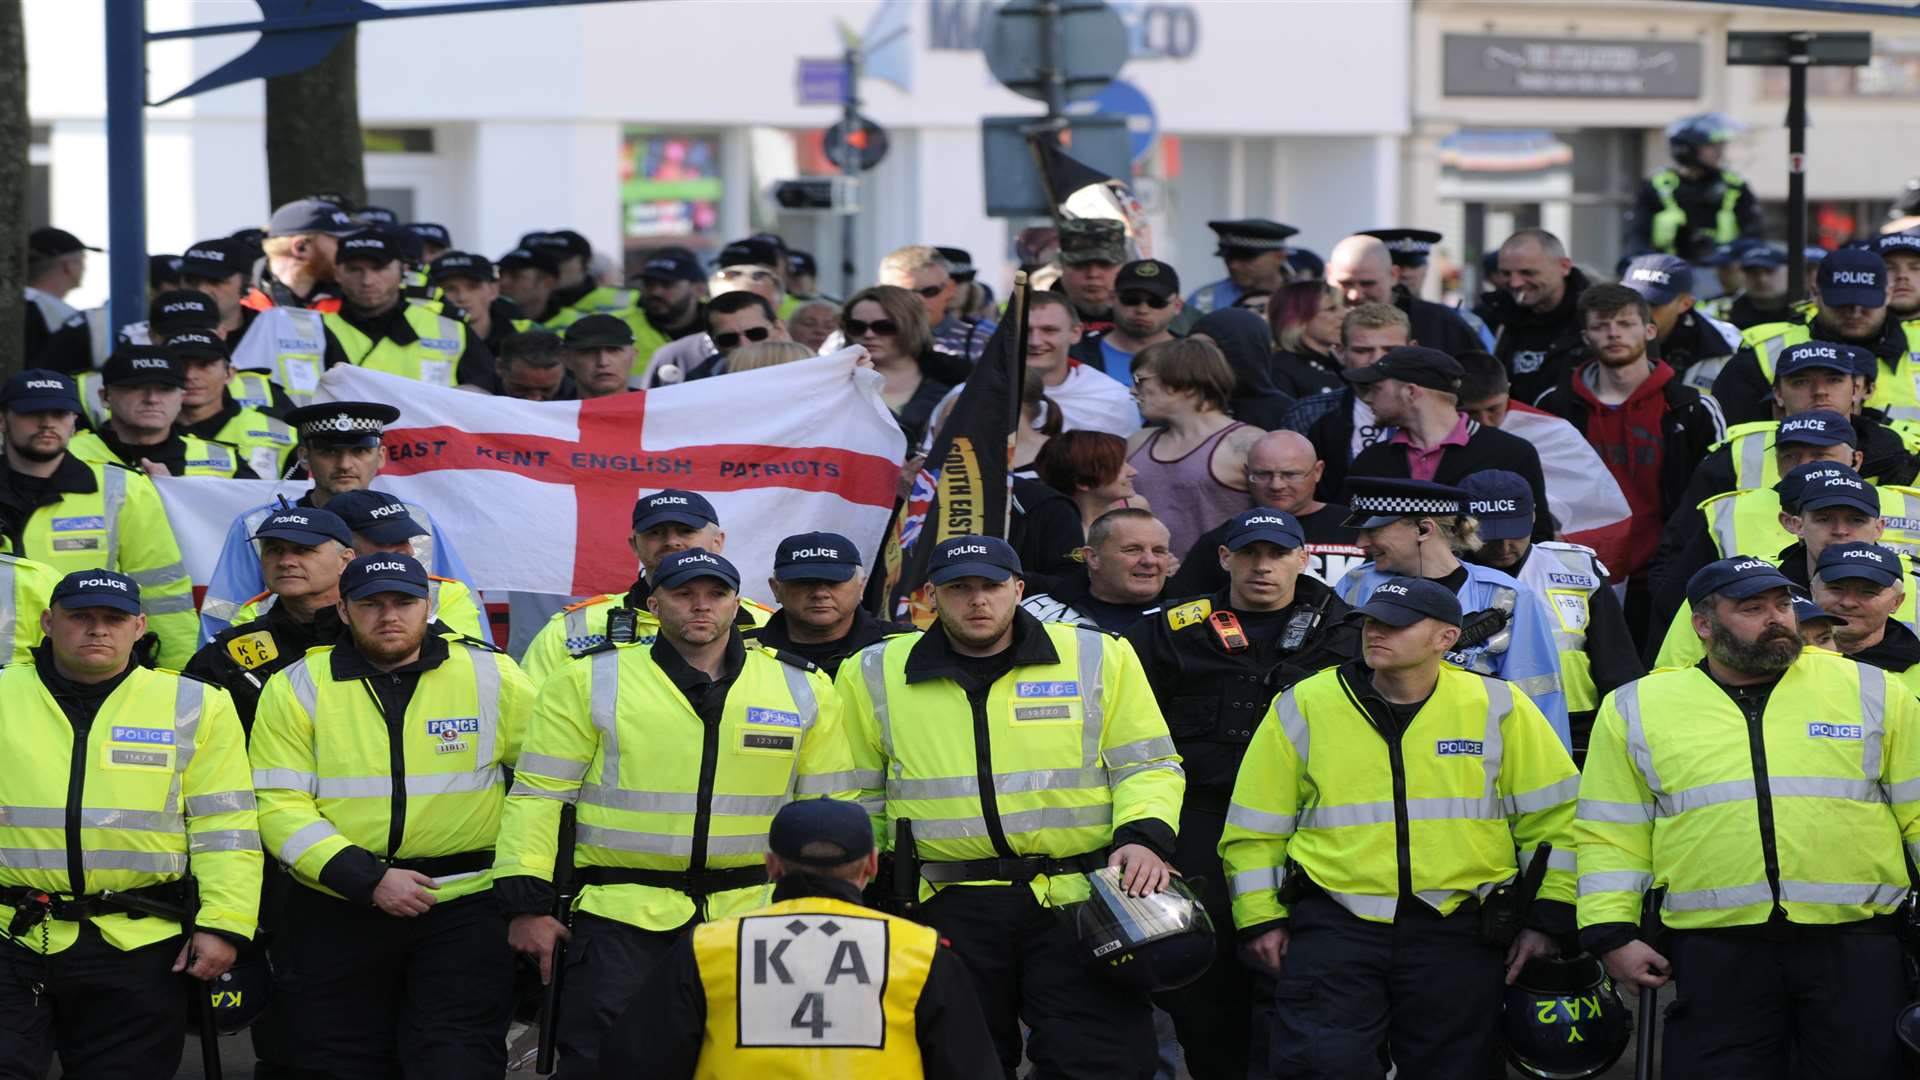 Around 30 far-right demonstrators turned up to march